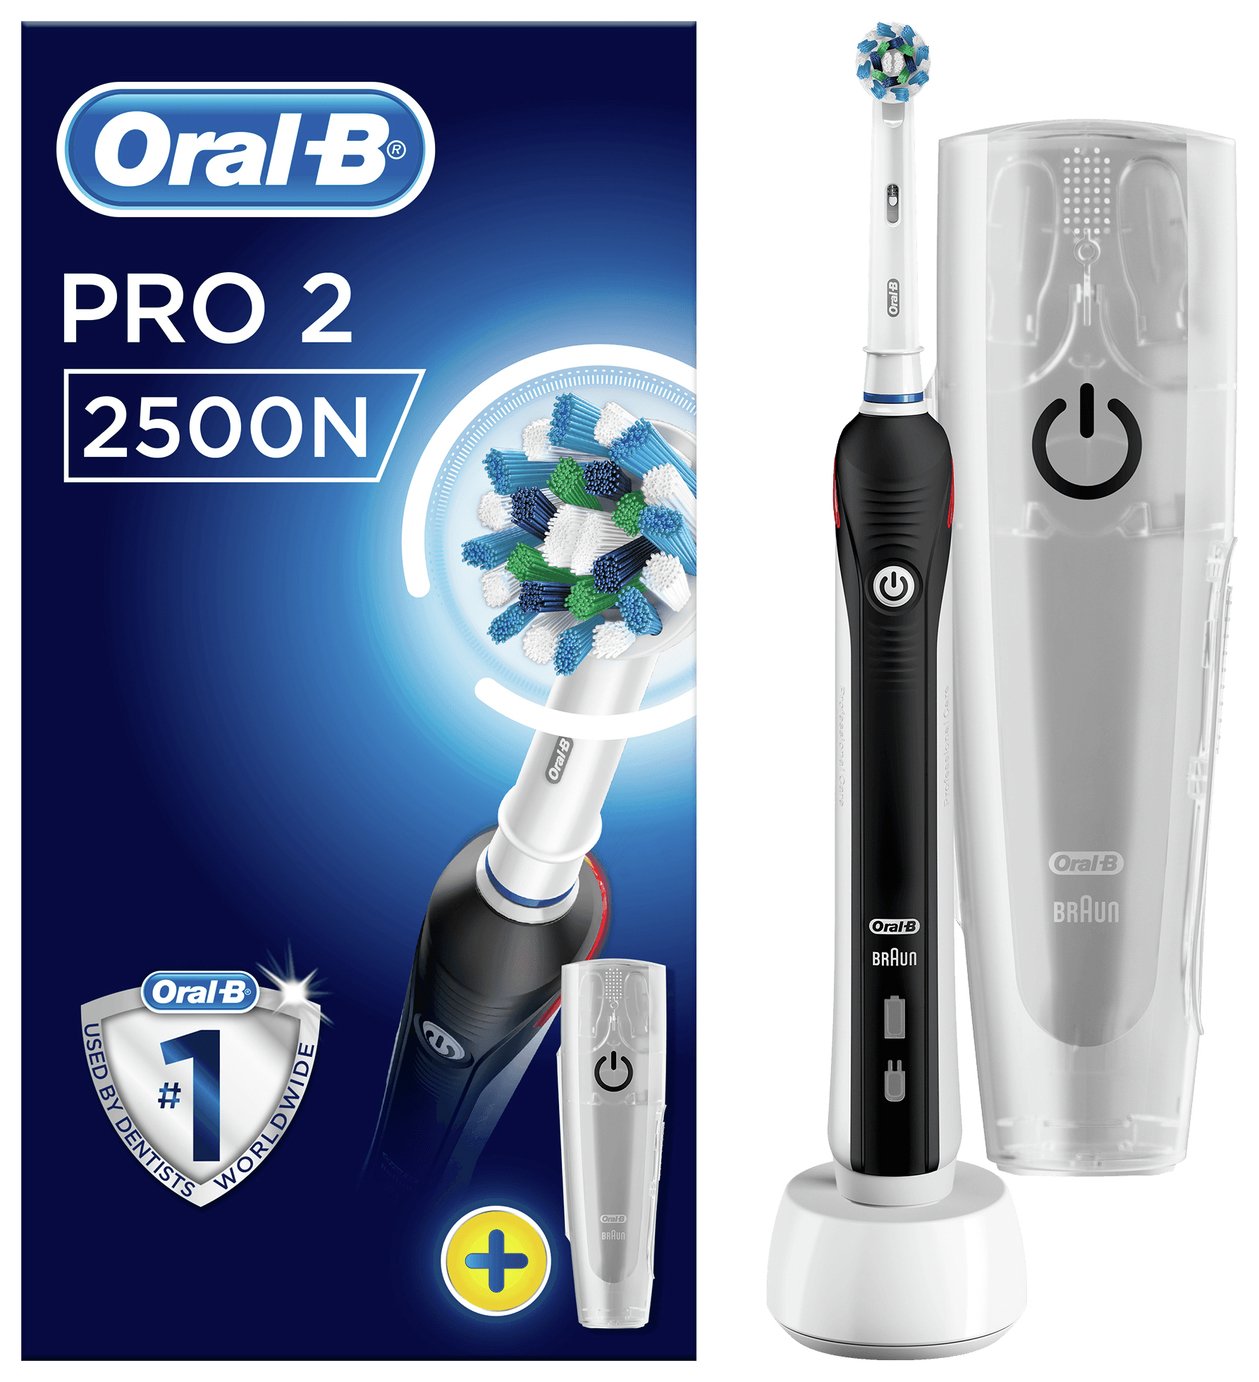 OralB Pro 2 2500N CrossAction Electric Toothbrush Reviews